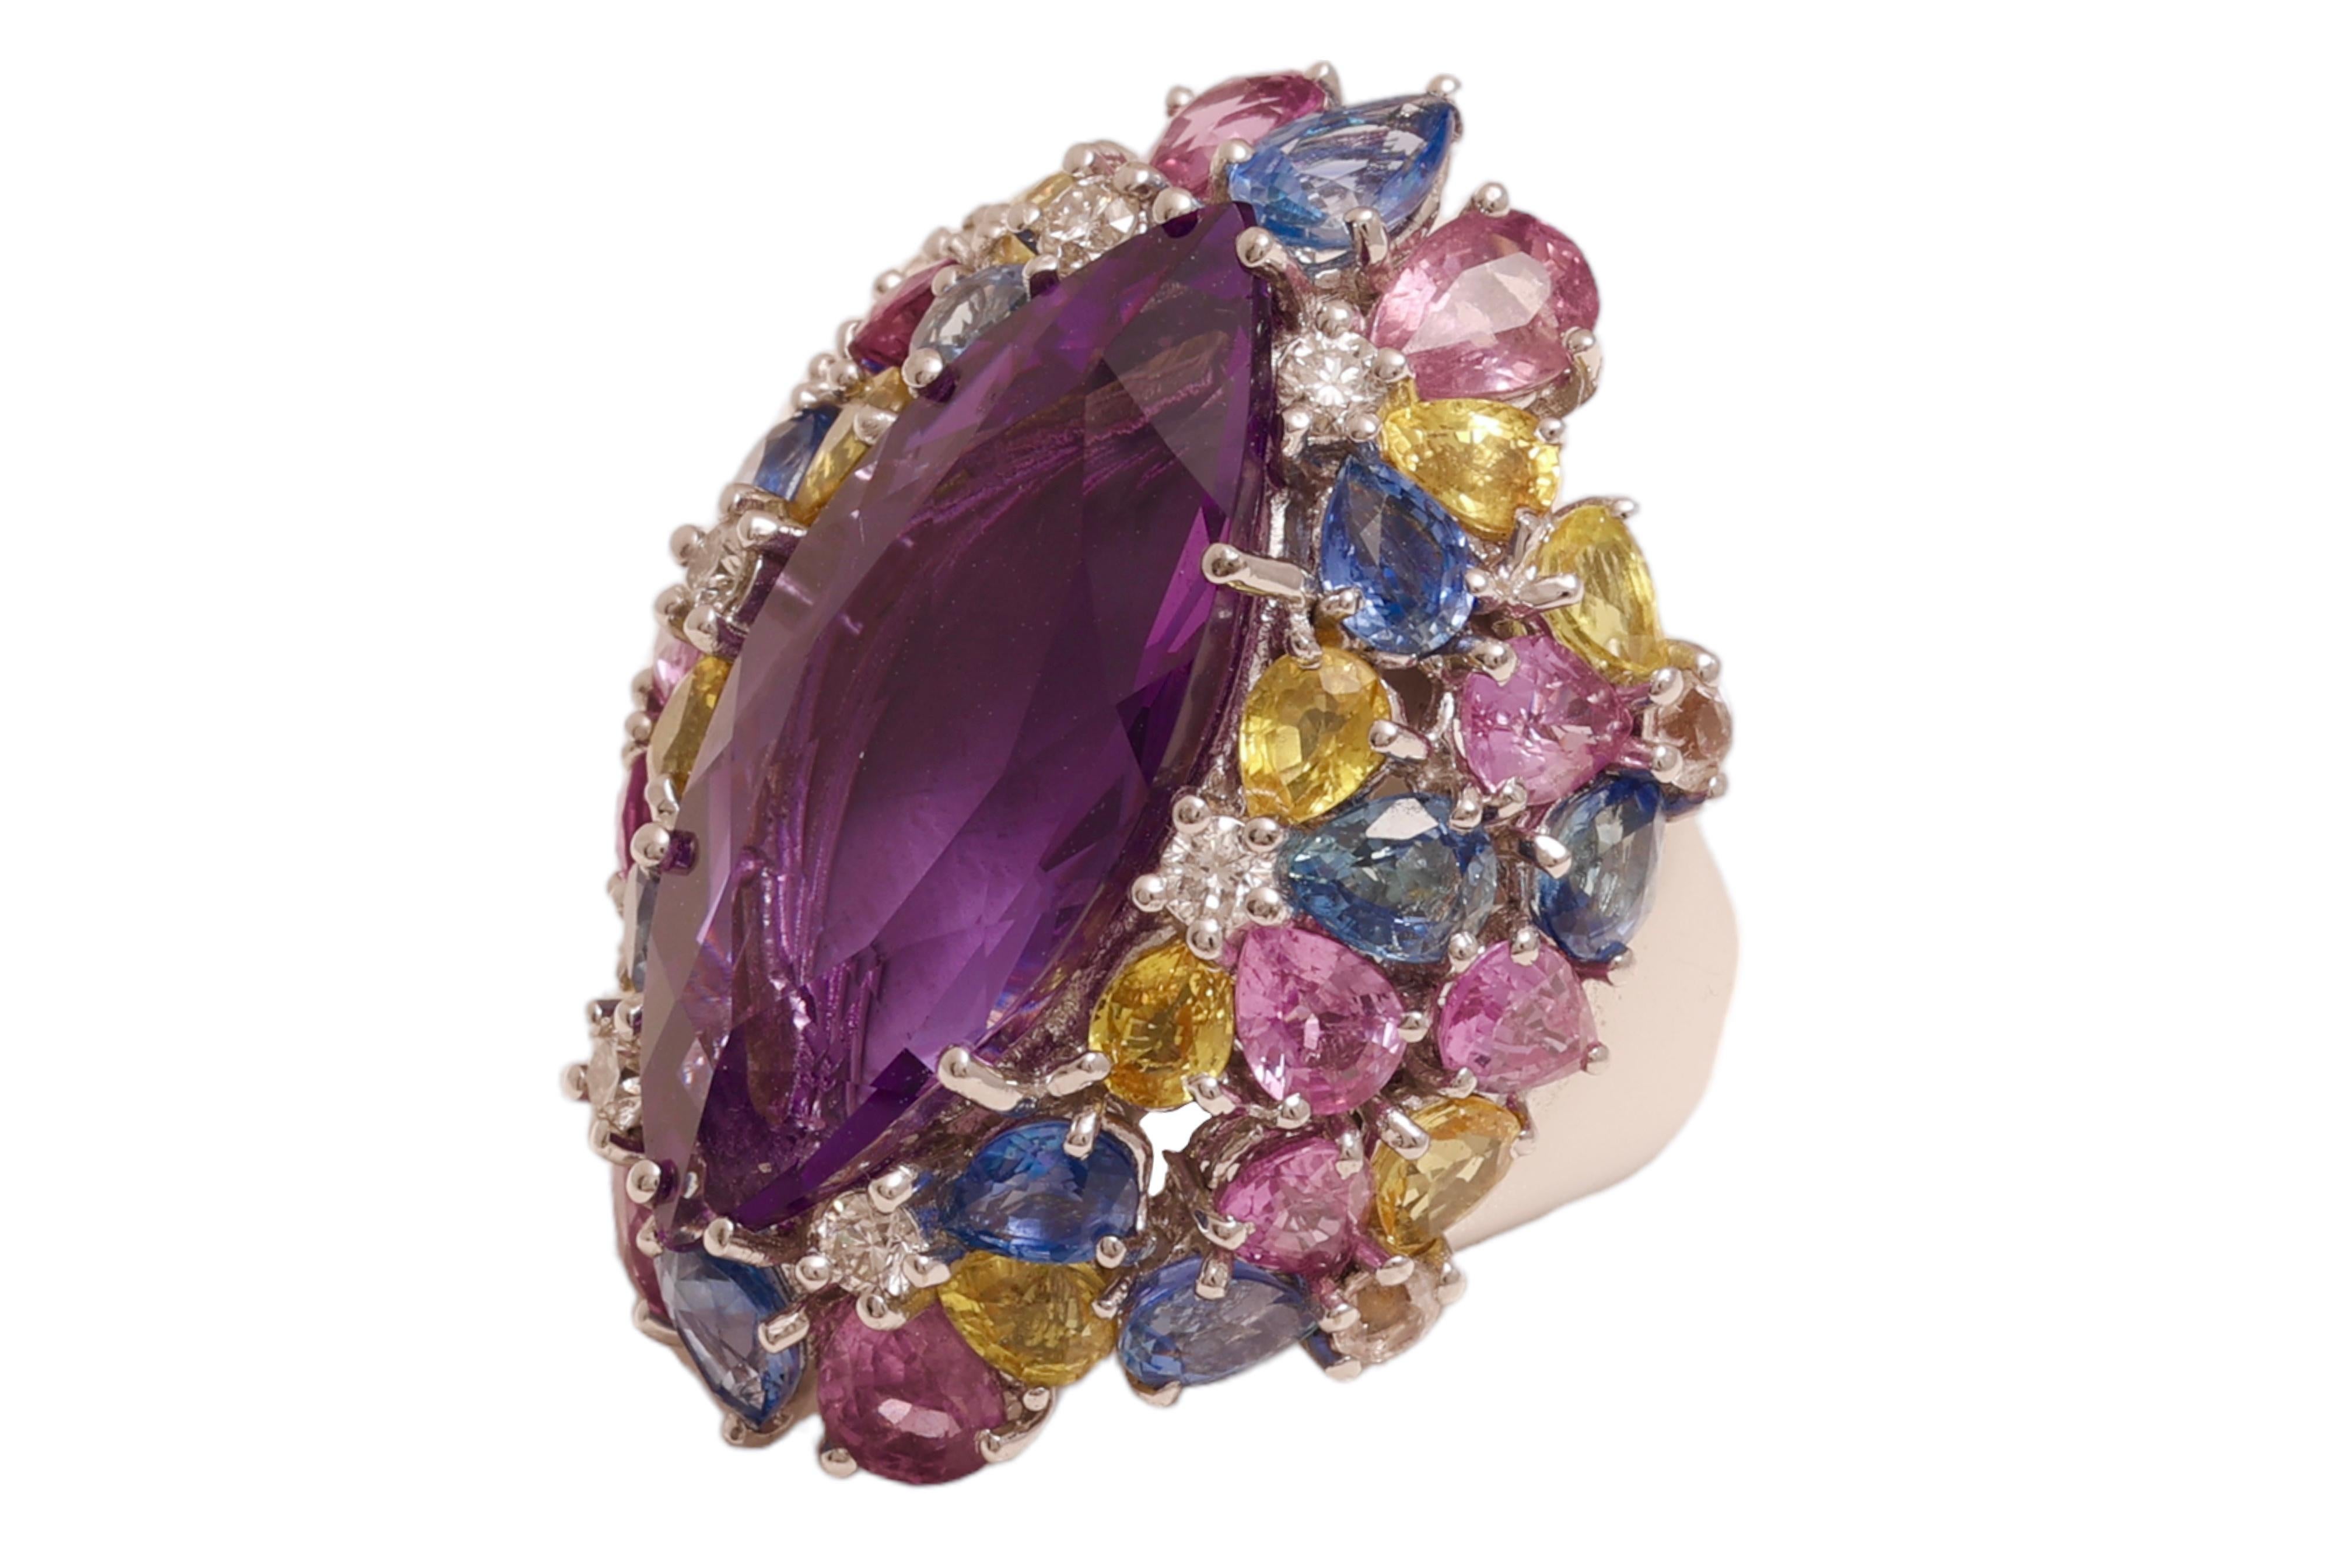 Marquise Cut 18kt White Gold Ring Big Amethyst Center Stone & Blue, Pink Sapphires, Diamonds  For Sale